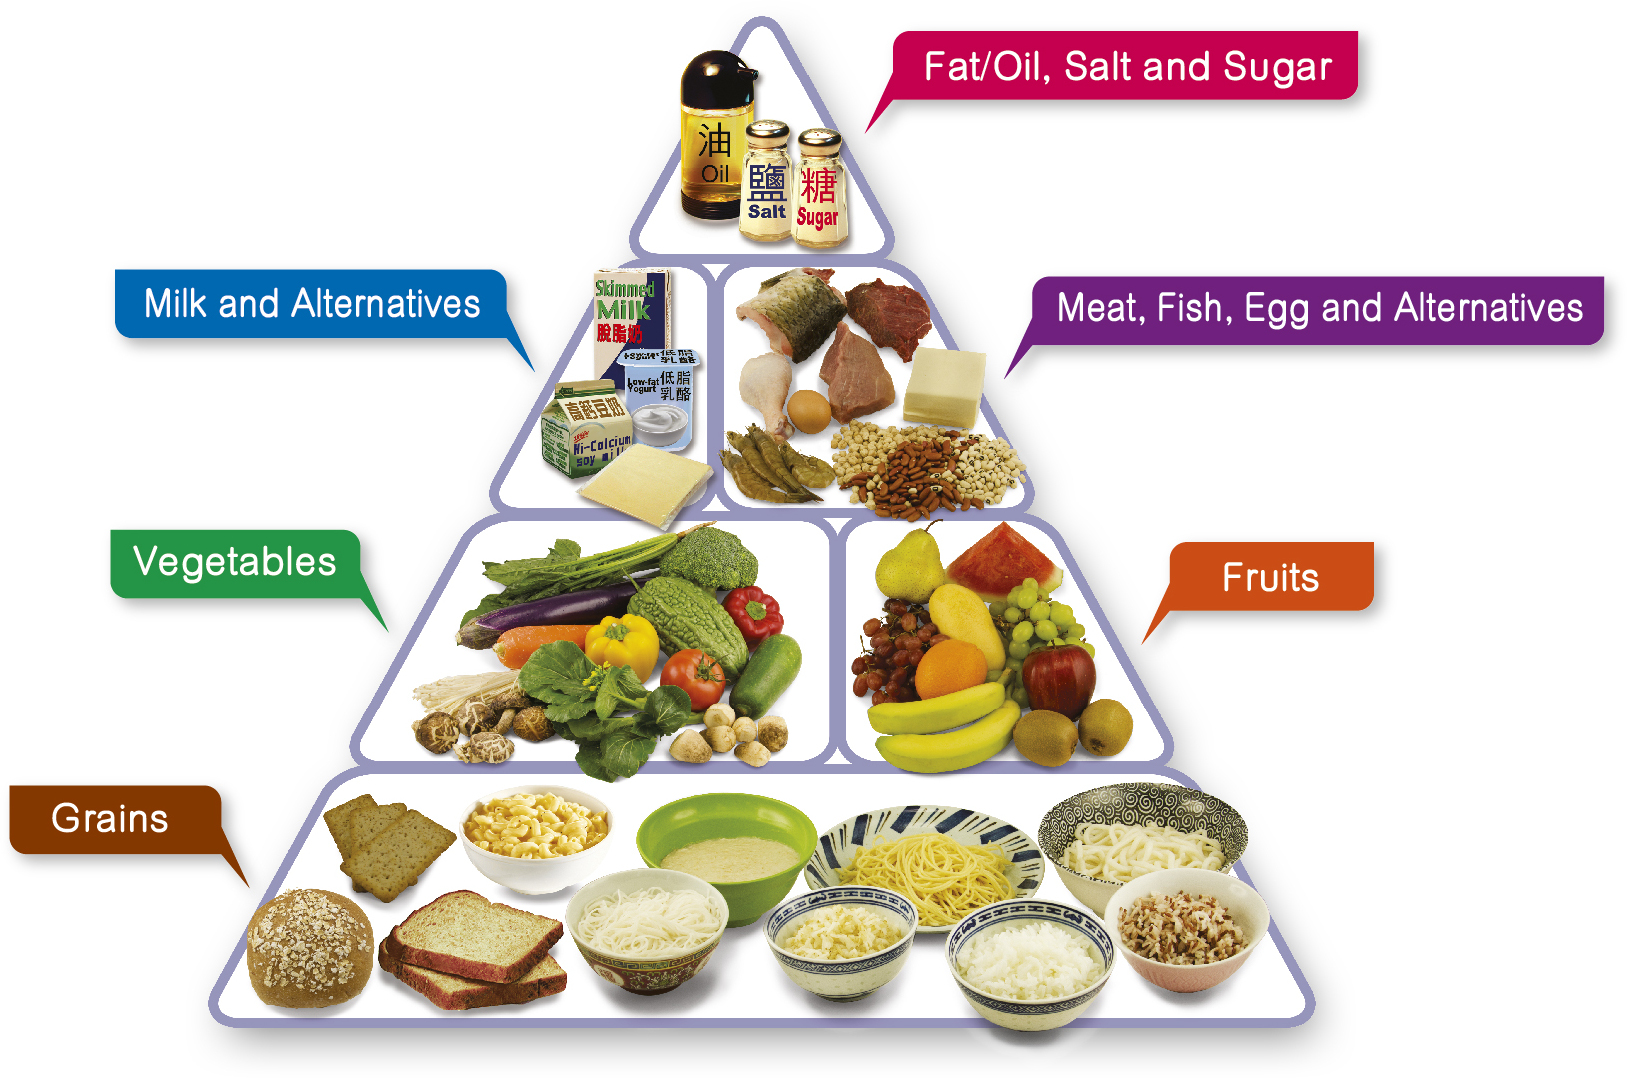 Centre For Health Protection The Food Pyramid A Guide To A Balanced Diet